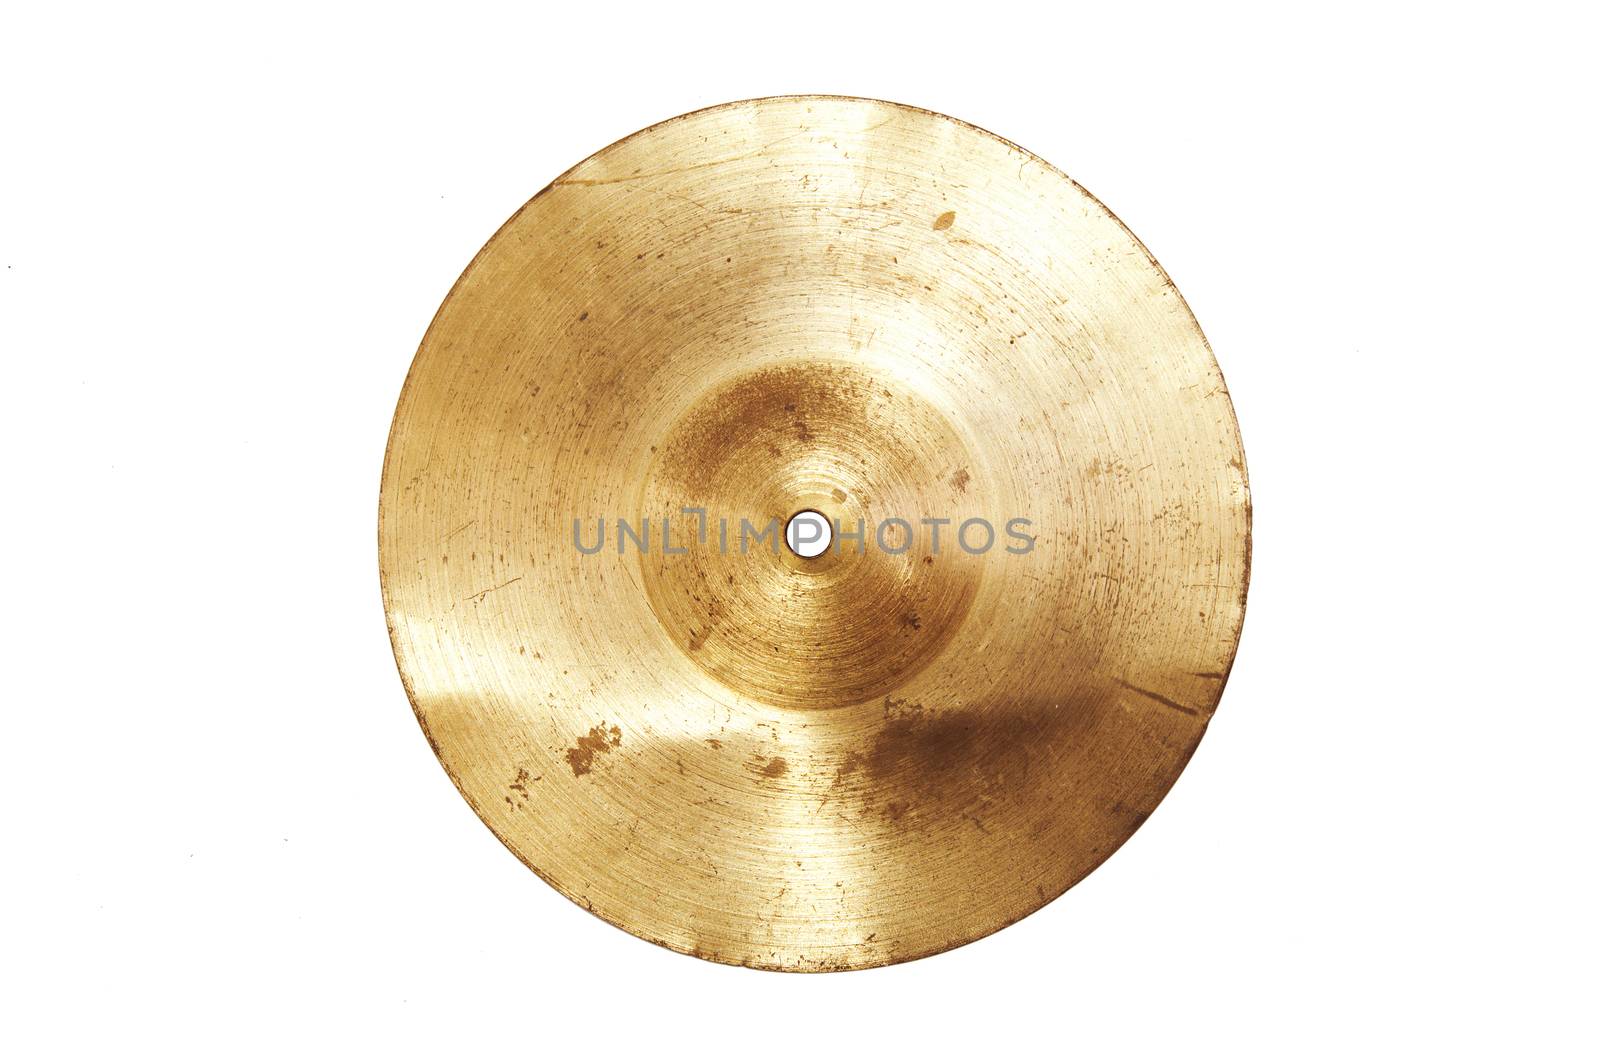 Music conceptual image. Close up of an old cymbal on isolated background.